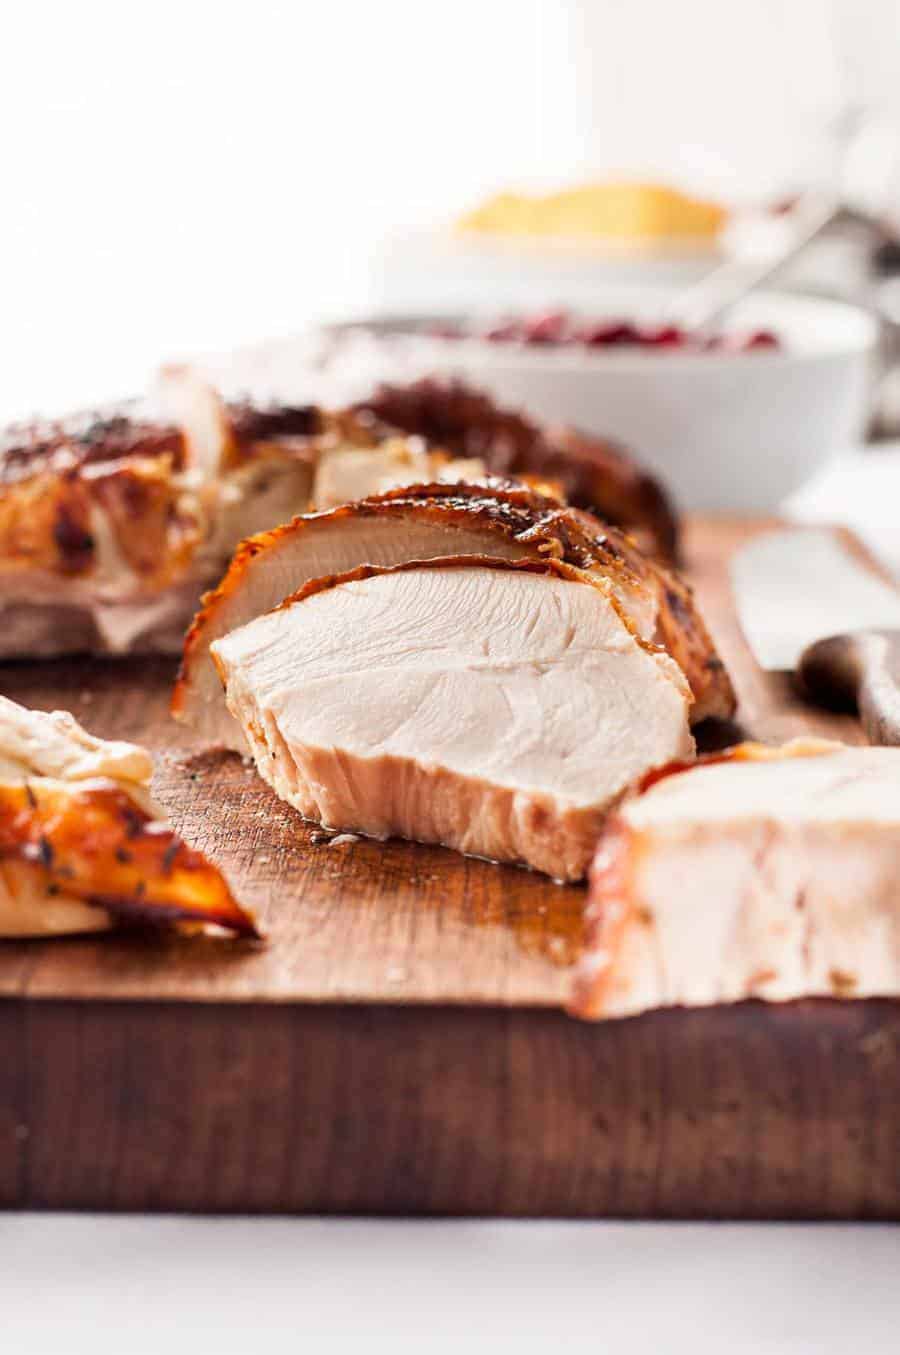 Genius Easy Juicy Roast Turkey (Dry Brined) - no bucket required, brine while turkey is defrosting AND the turkey is incredibly juicy! Far better than wet brining.